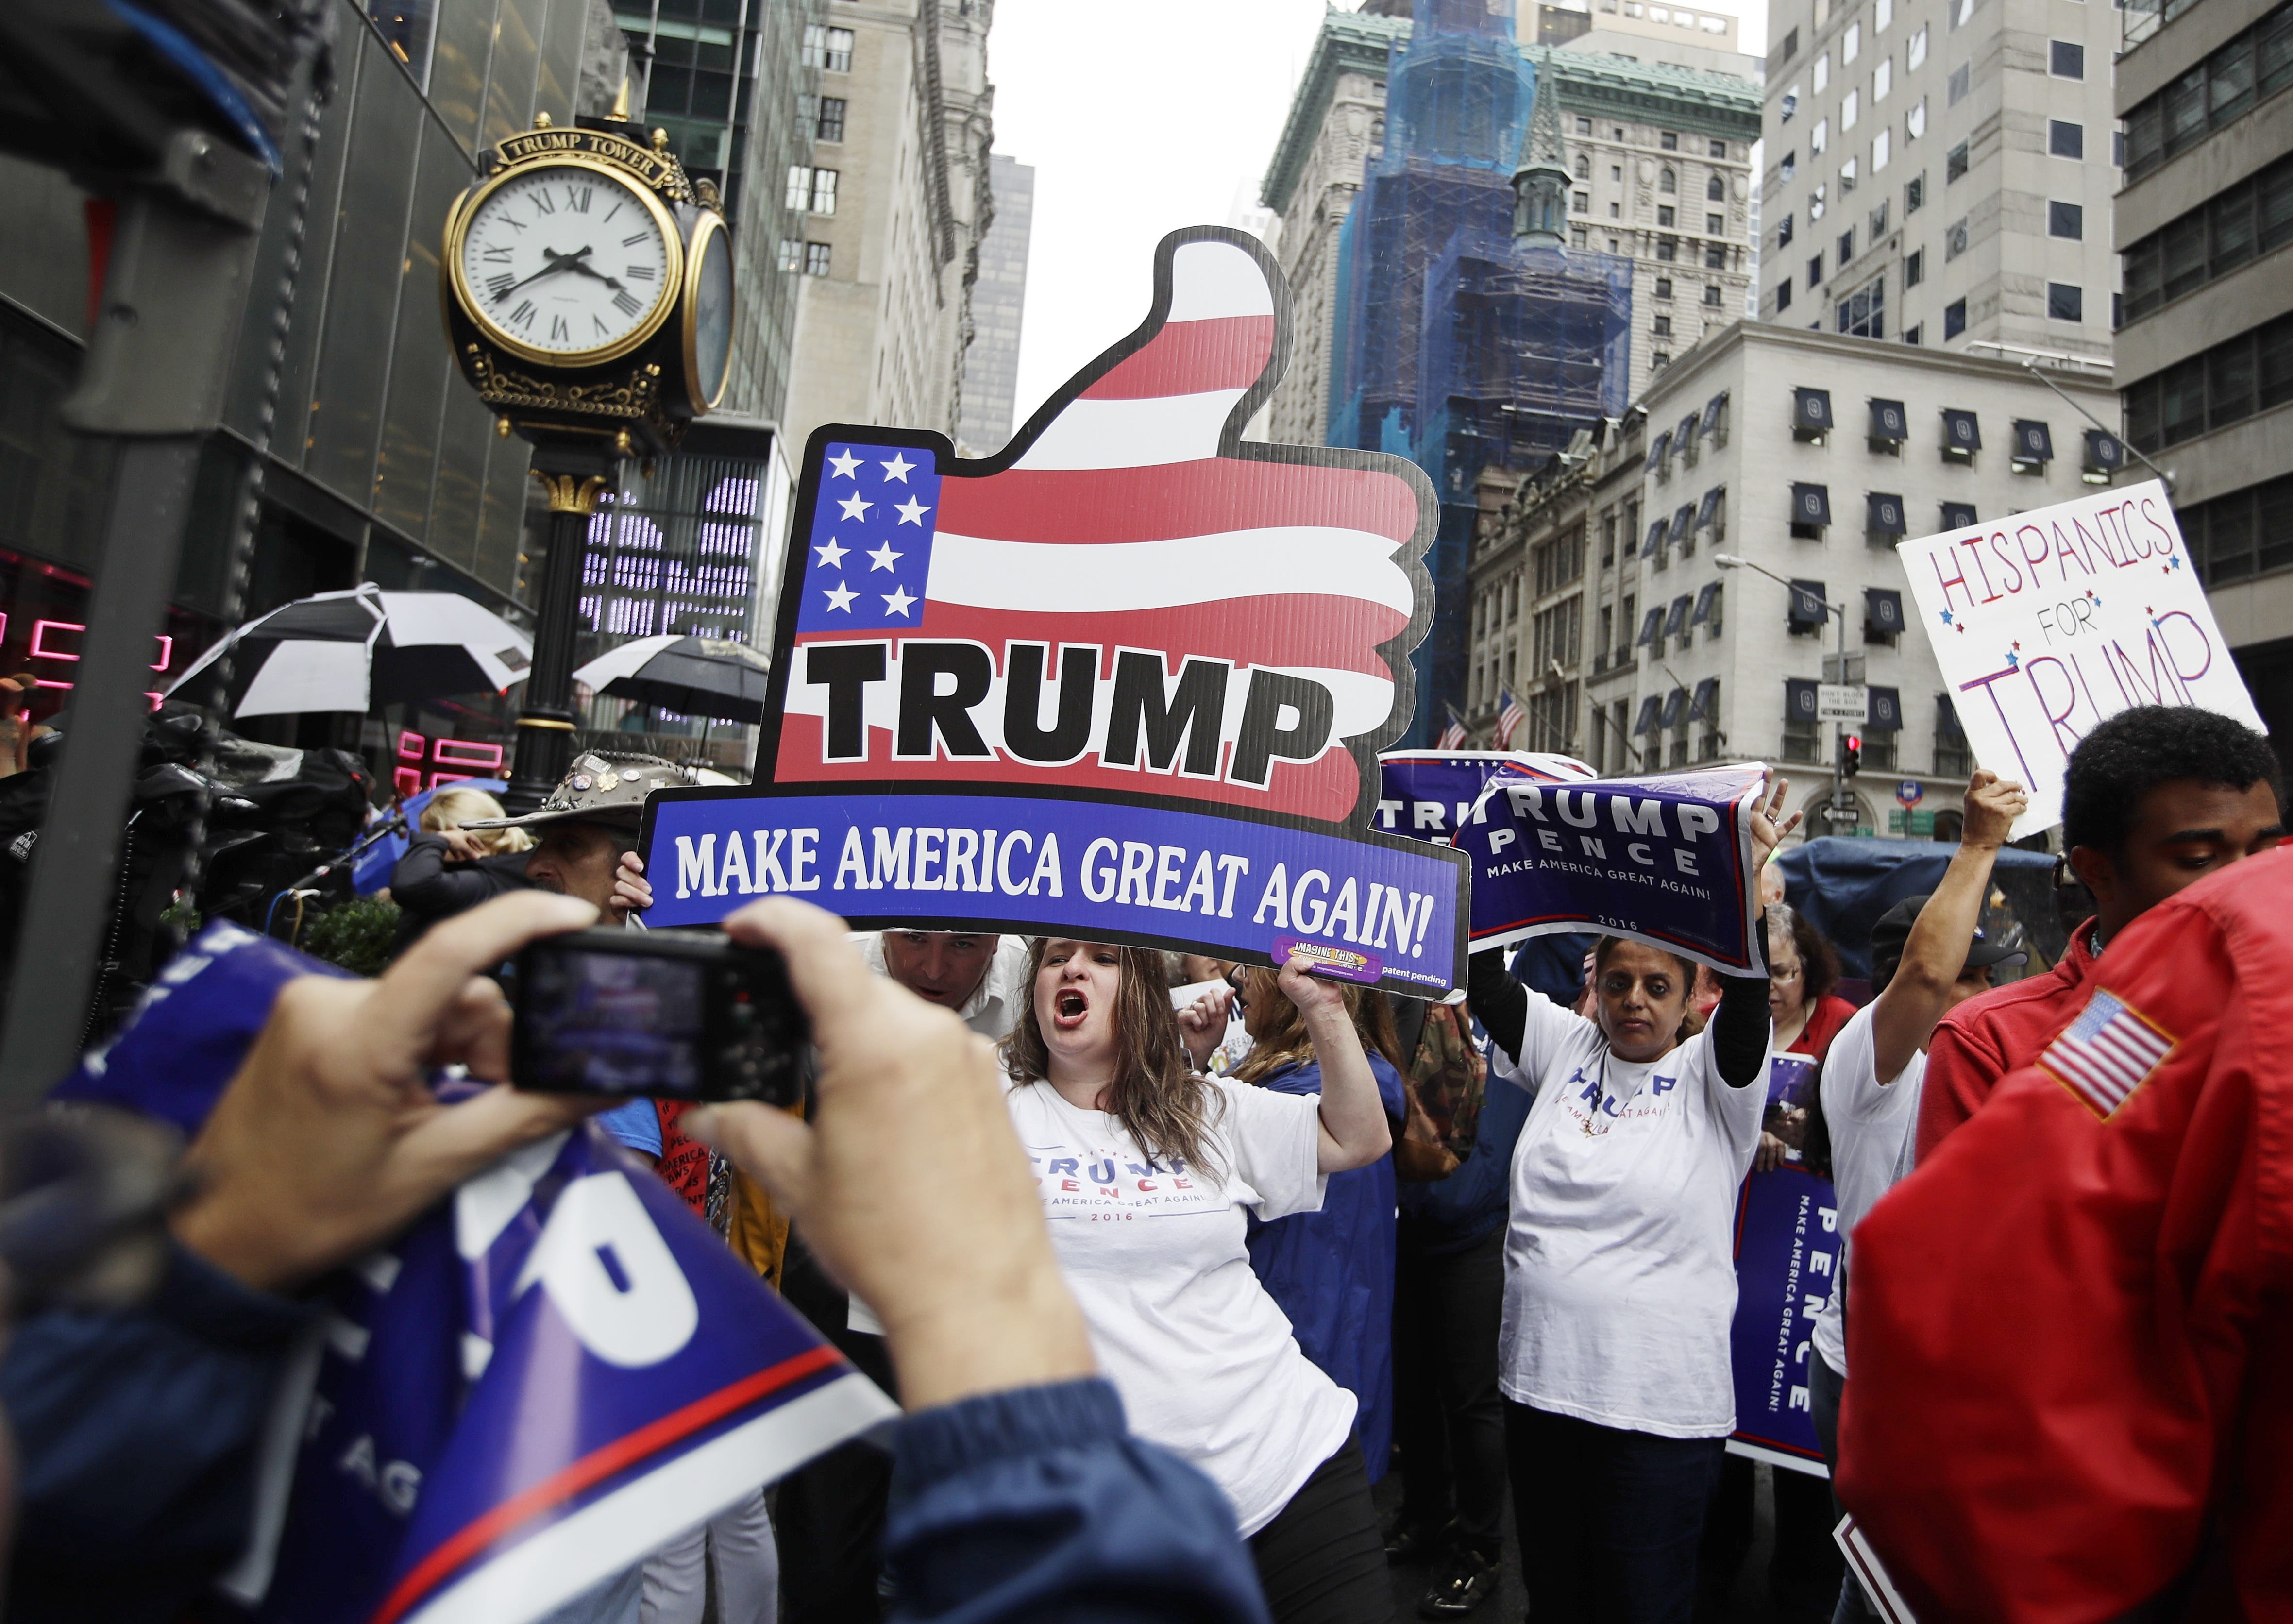 Supporters of Republican presidential nominee Donald Trump gather at Trump Tower Saturday, Oct. 8, 2016, in New York. Trump insisted Saturday, Oct. 8, 2016, he would "never" abandon his White House bid, facing an intensifying backlash from Republican leaders across the nation who called on him to quit the race following the release of his sexually charged comments caught on tape.